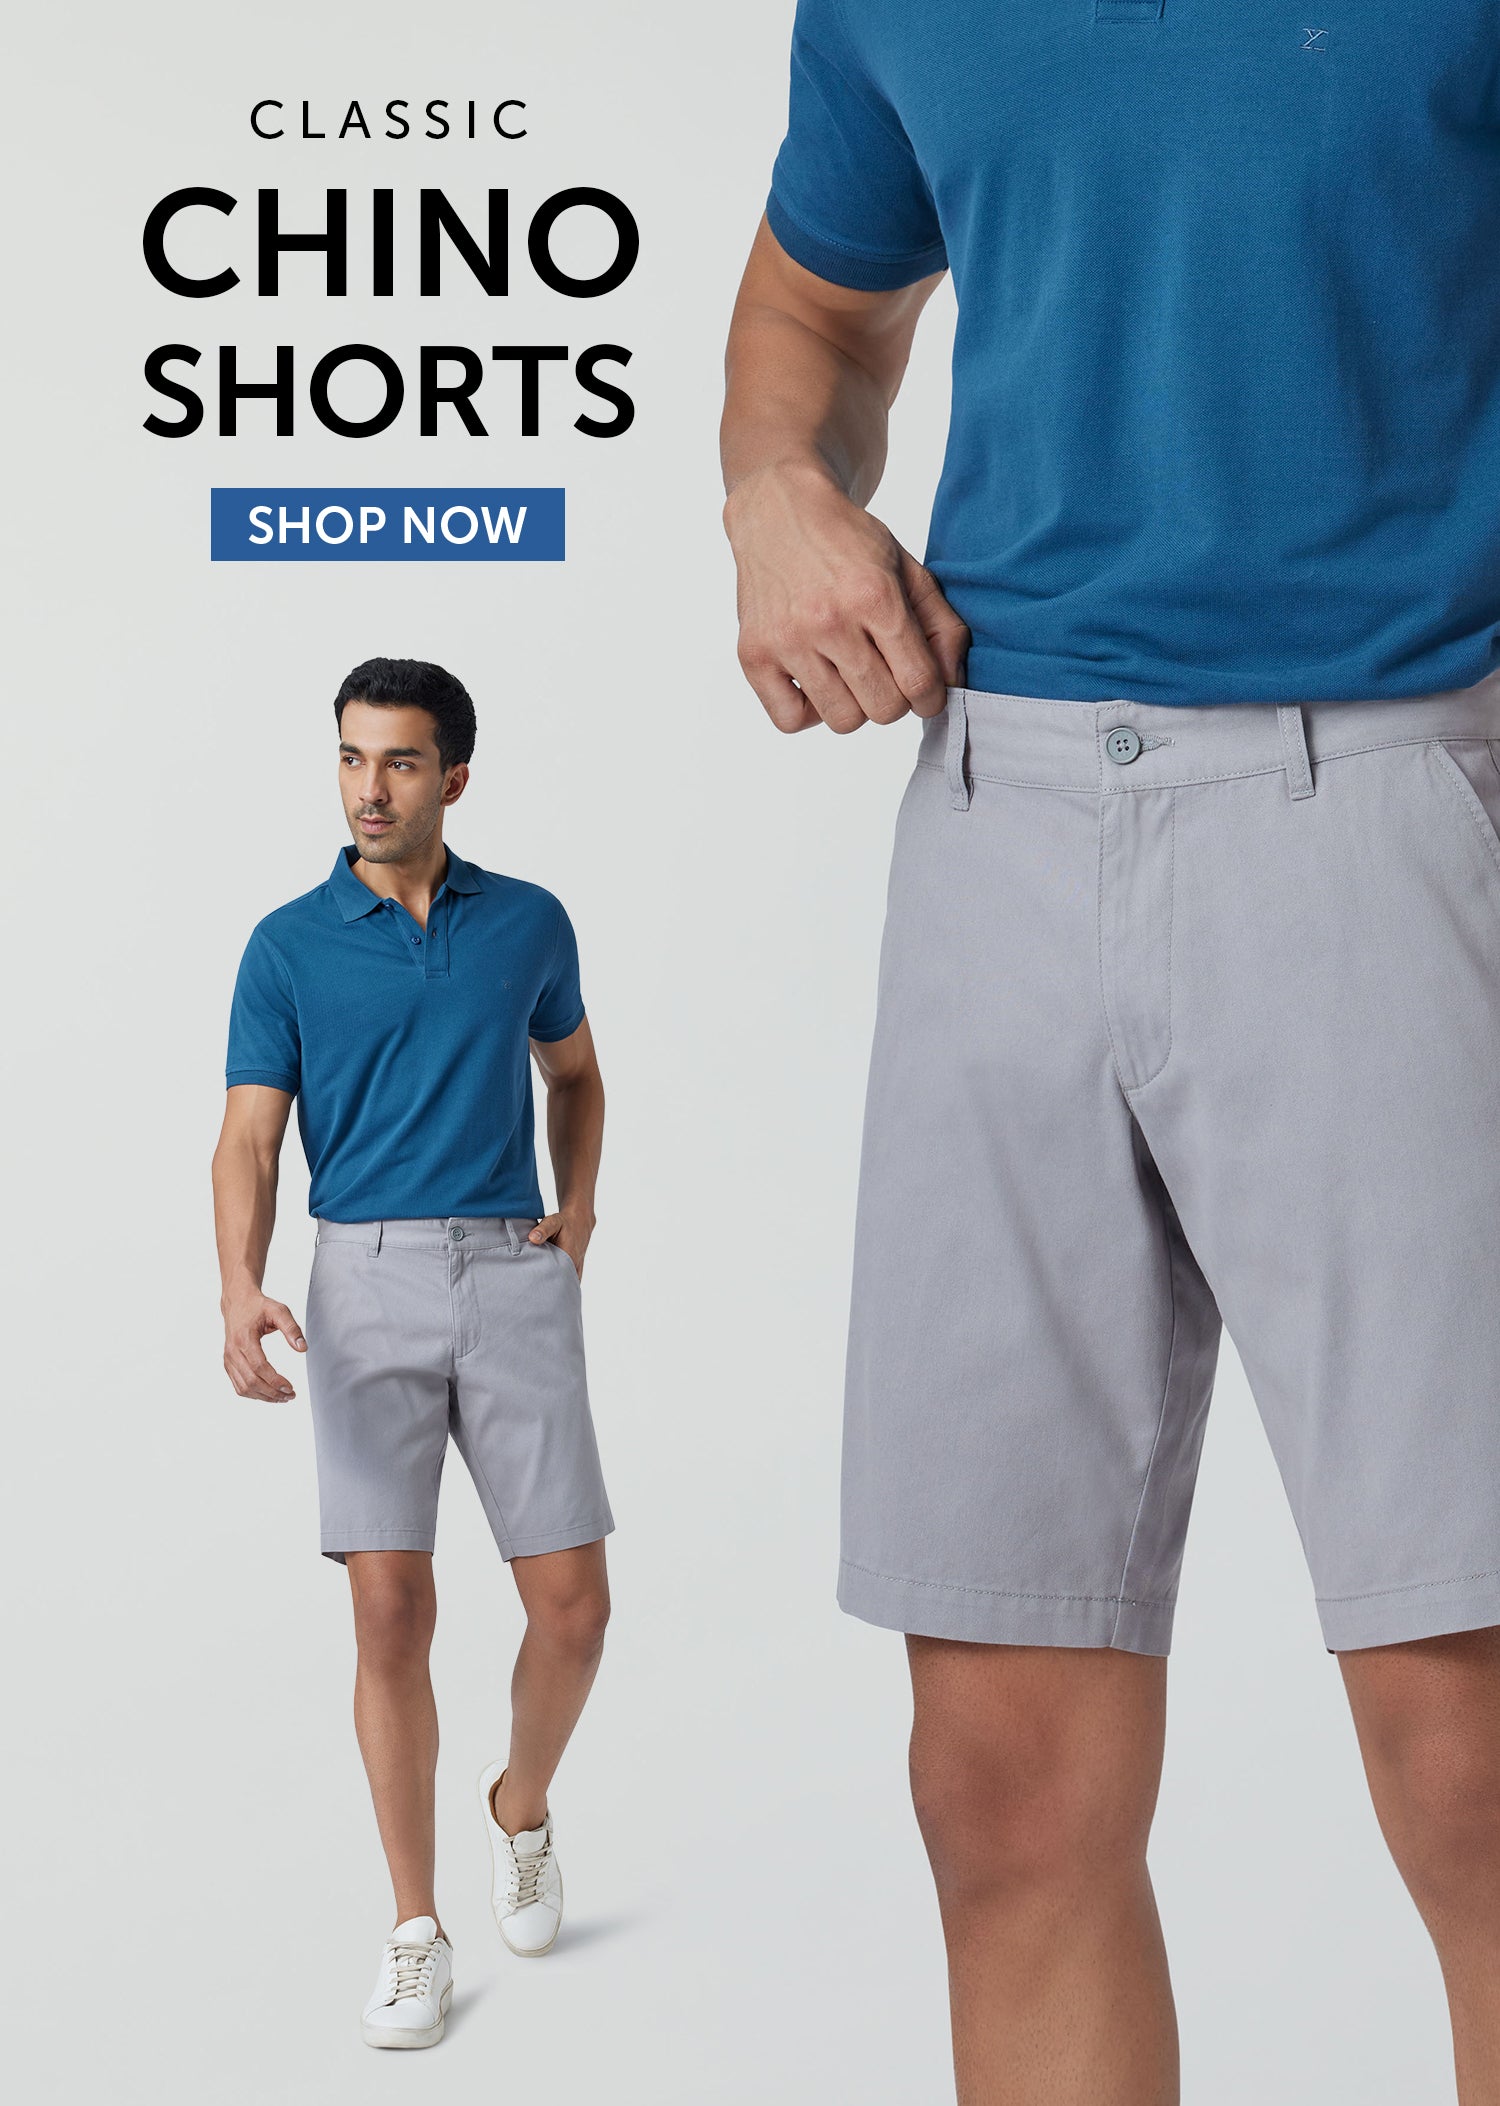 homepage-banner-classic-chino-shorts-mobile